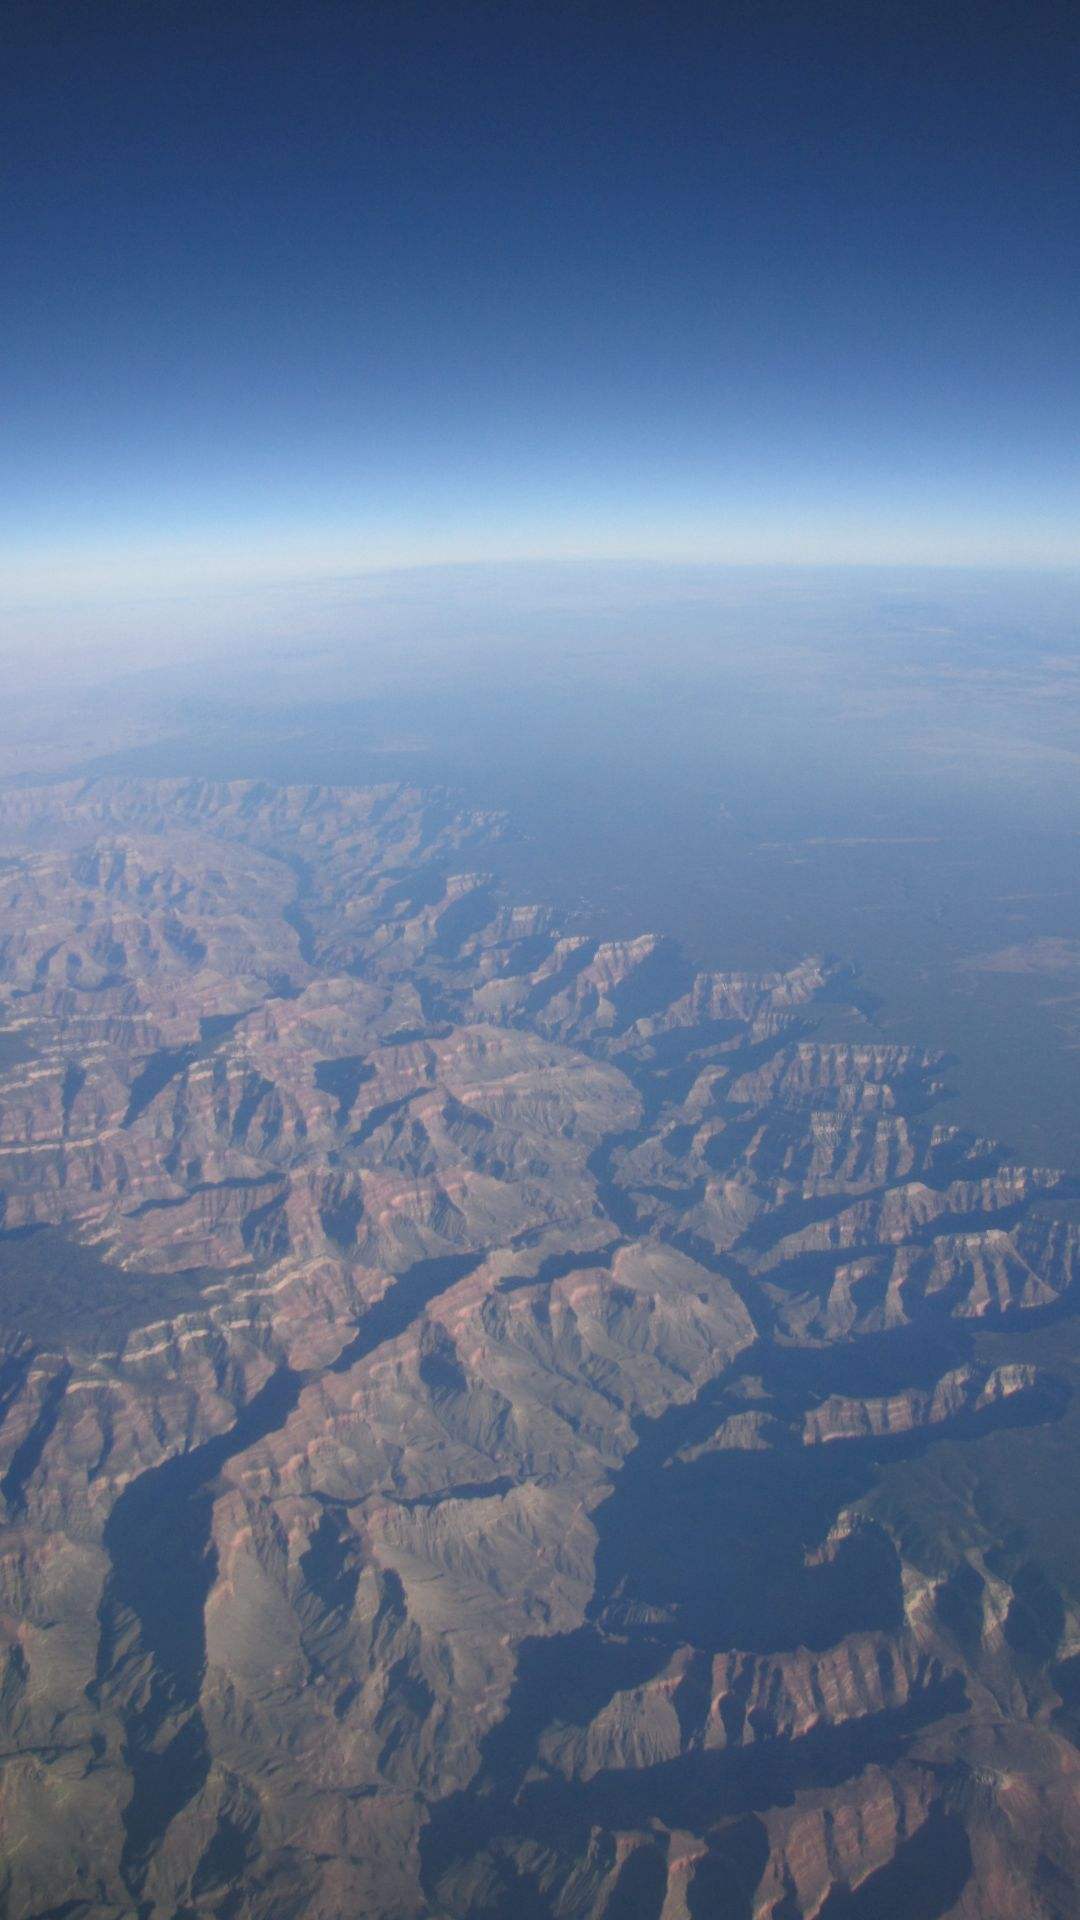 Yes, I am 5 years old, taking pictures from the plane to LA (oooh look, you can see the curve of the earth!)